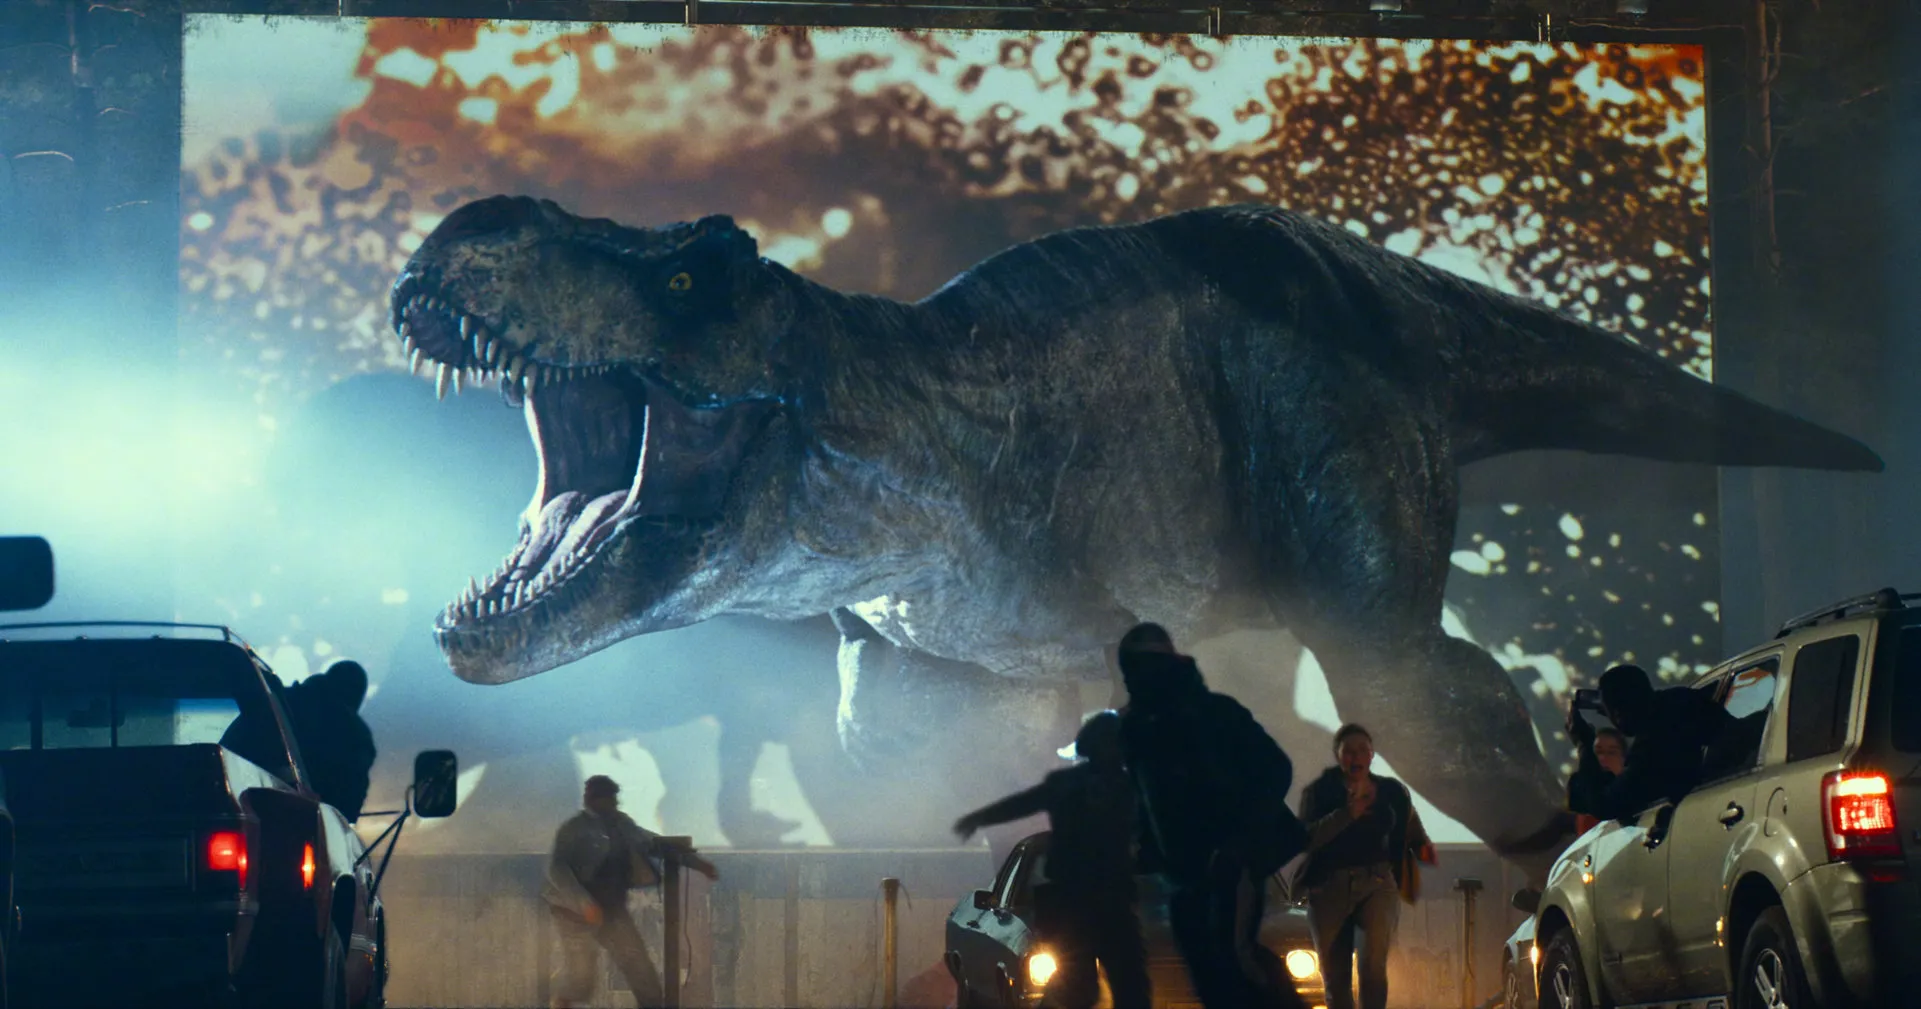 'Jurassic World: Dominion' Extended Edition Coming to Digital Platforms August 16 | FMV6